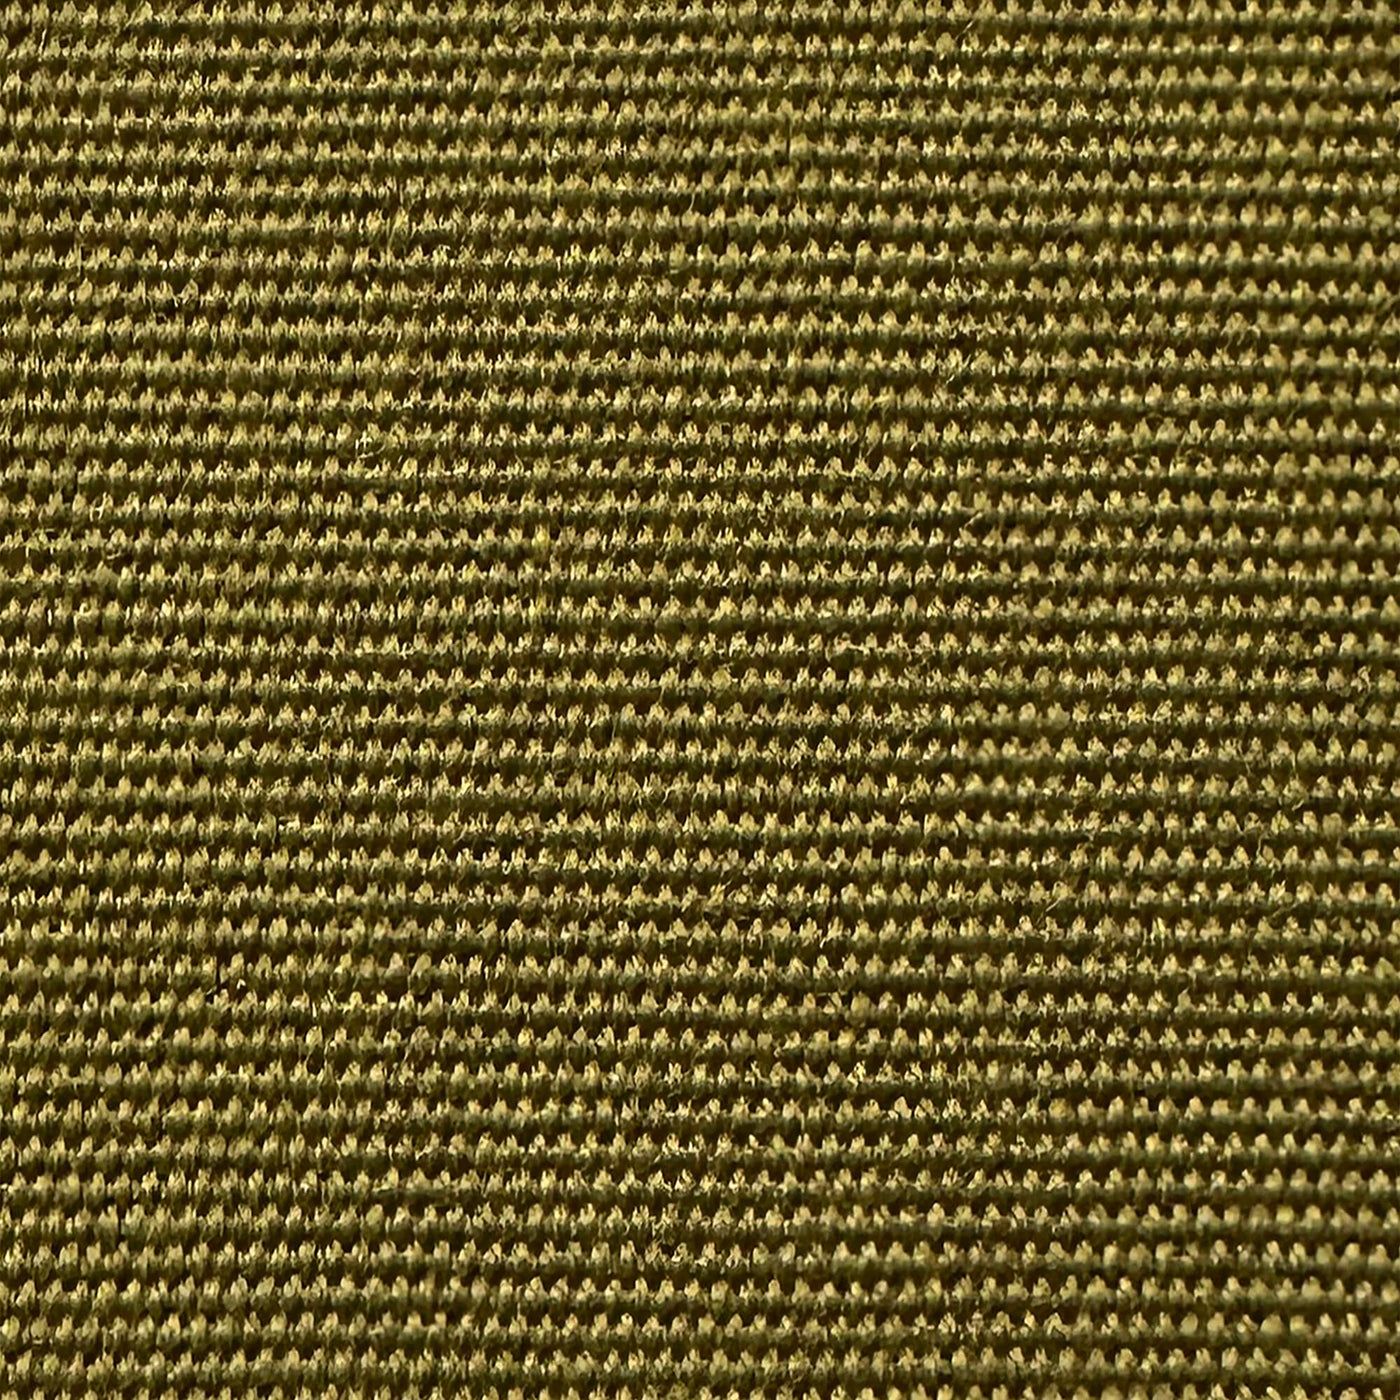 PENGI Outdoor Curtains Waterproof - Mix Olive